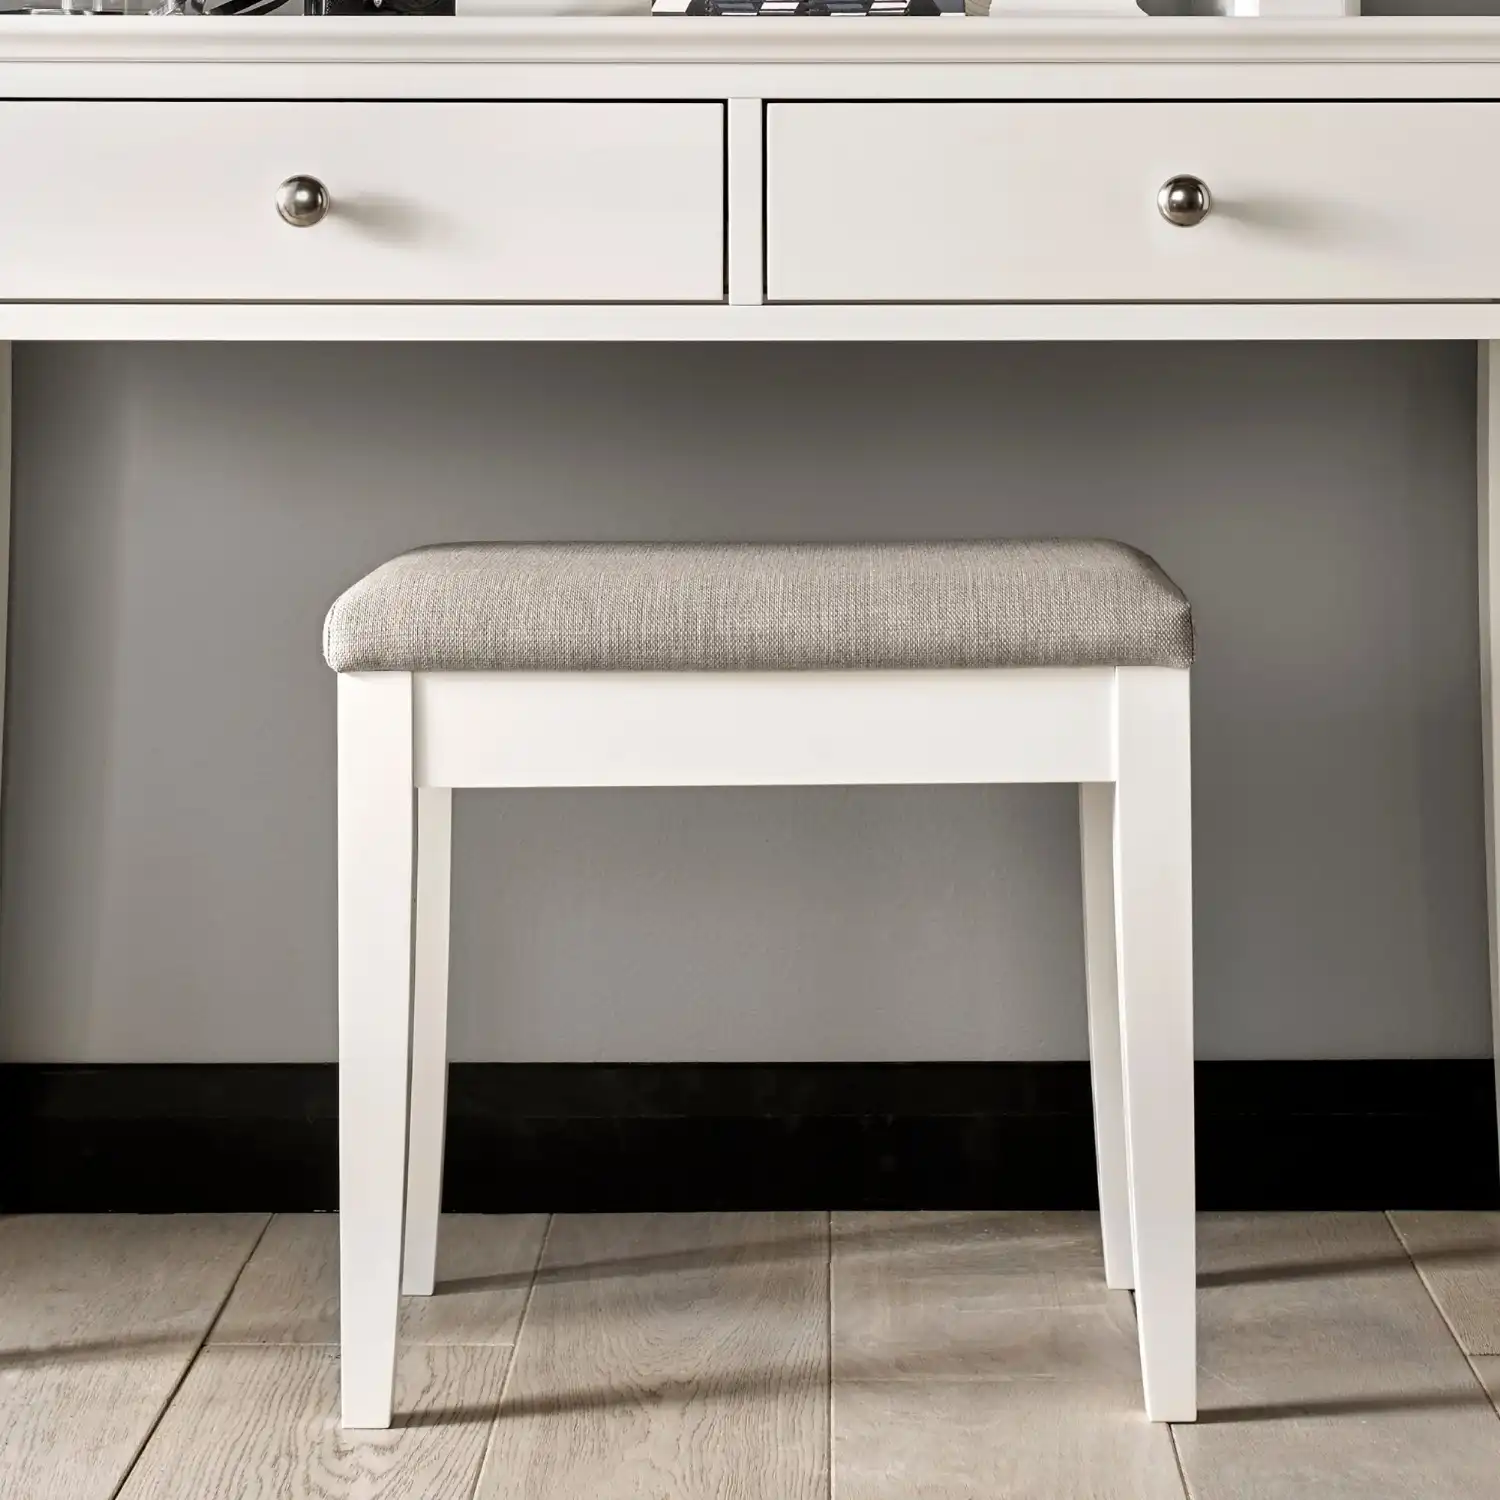 White Painted Dressing Table Stool in Grey Fabric